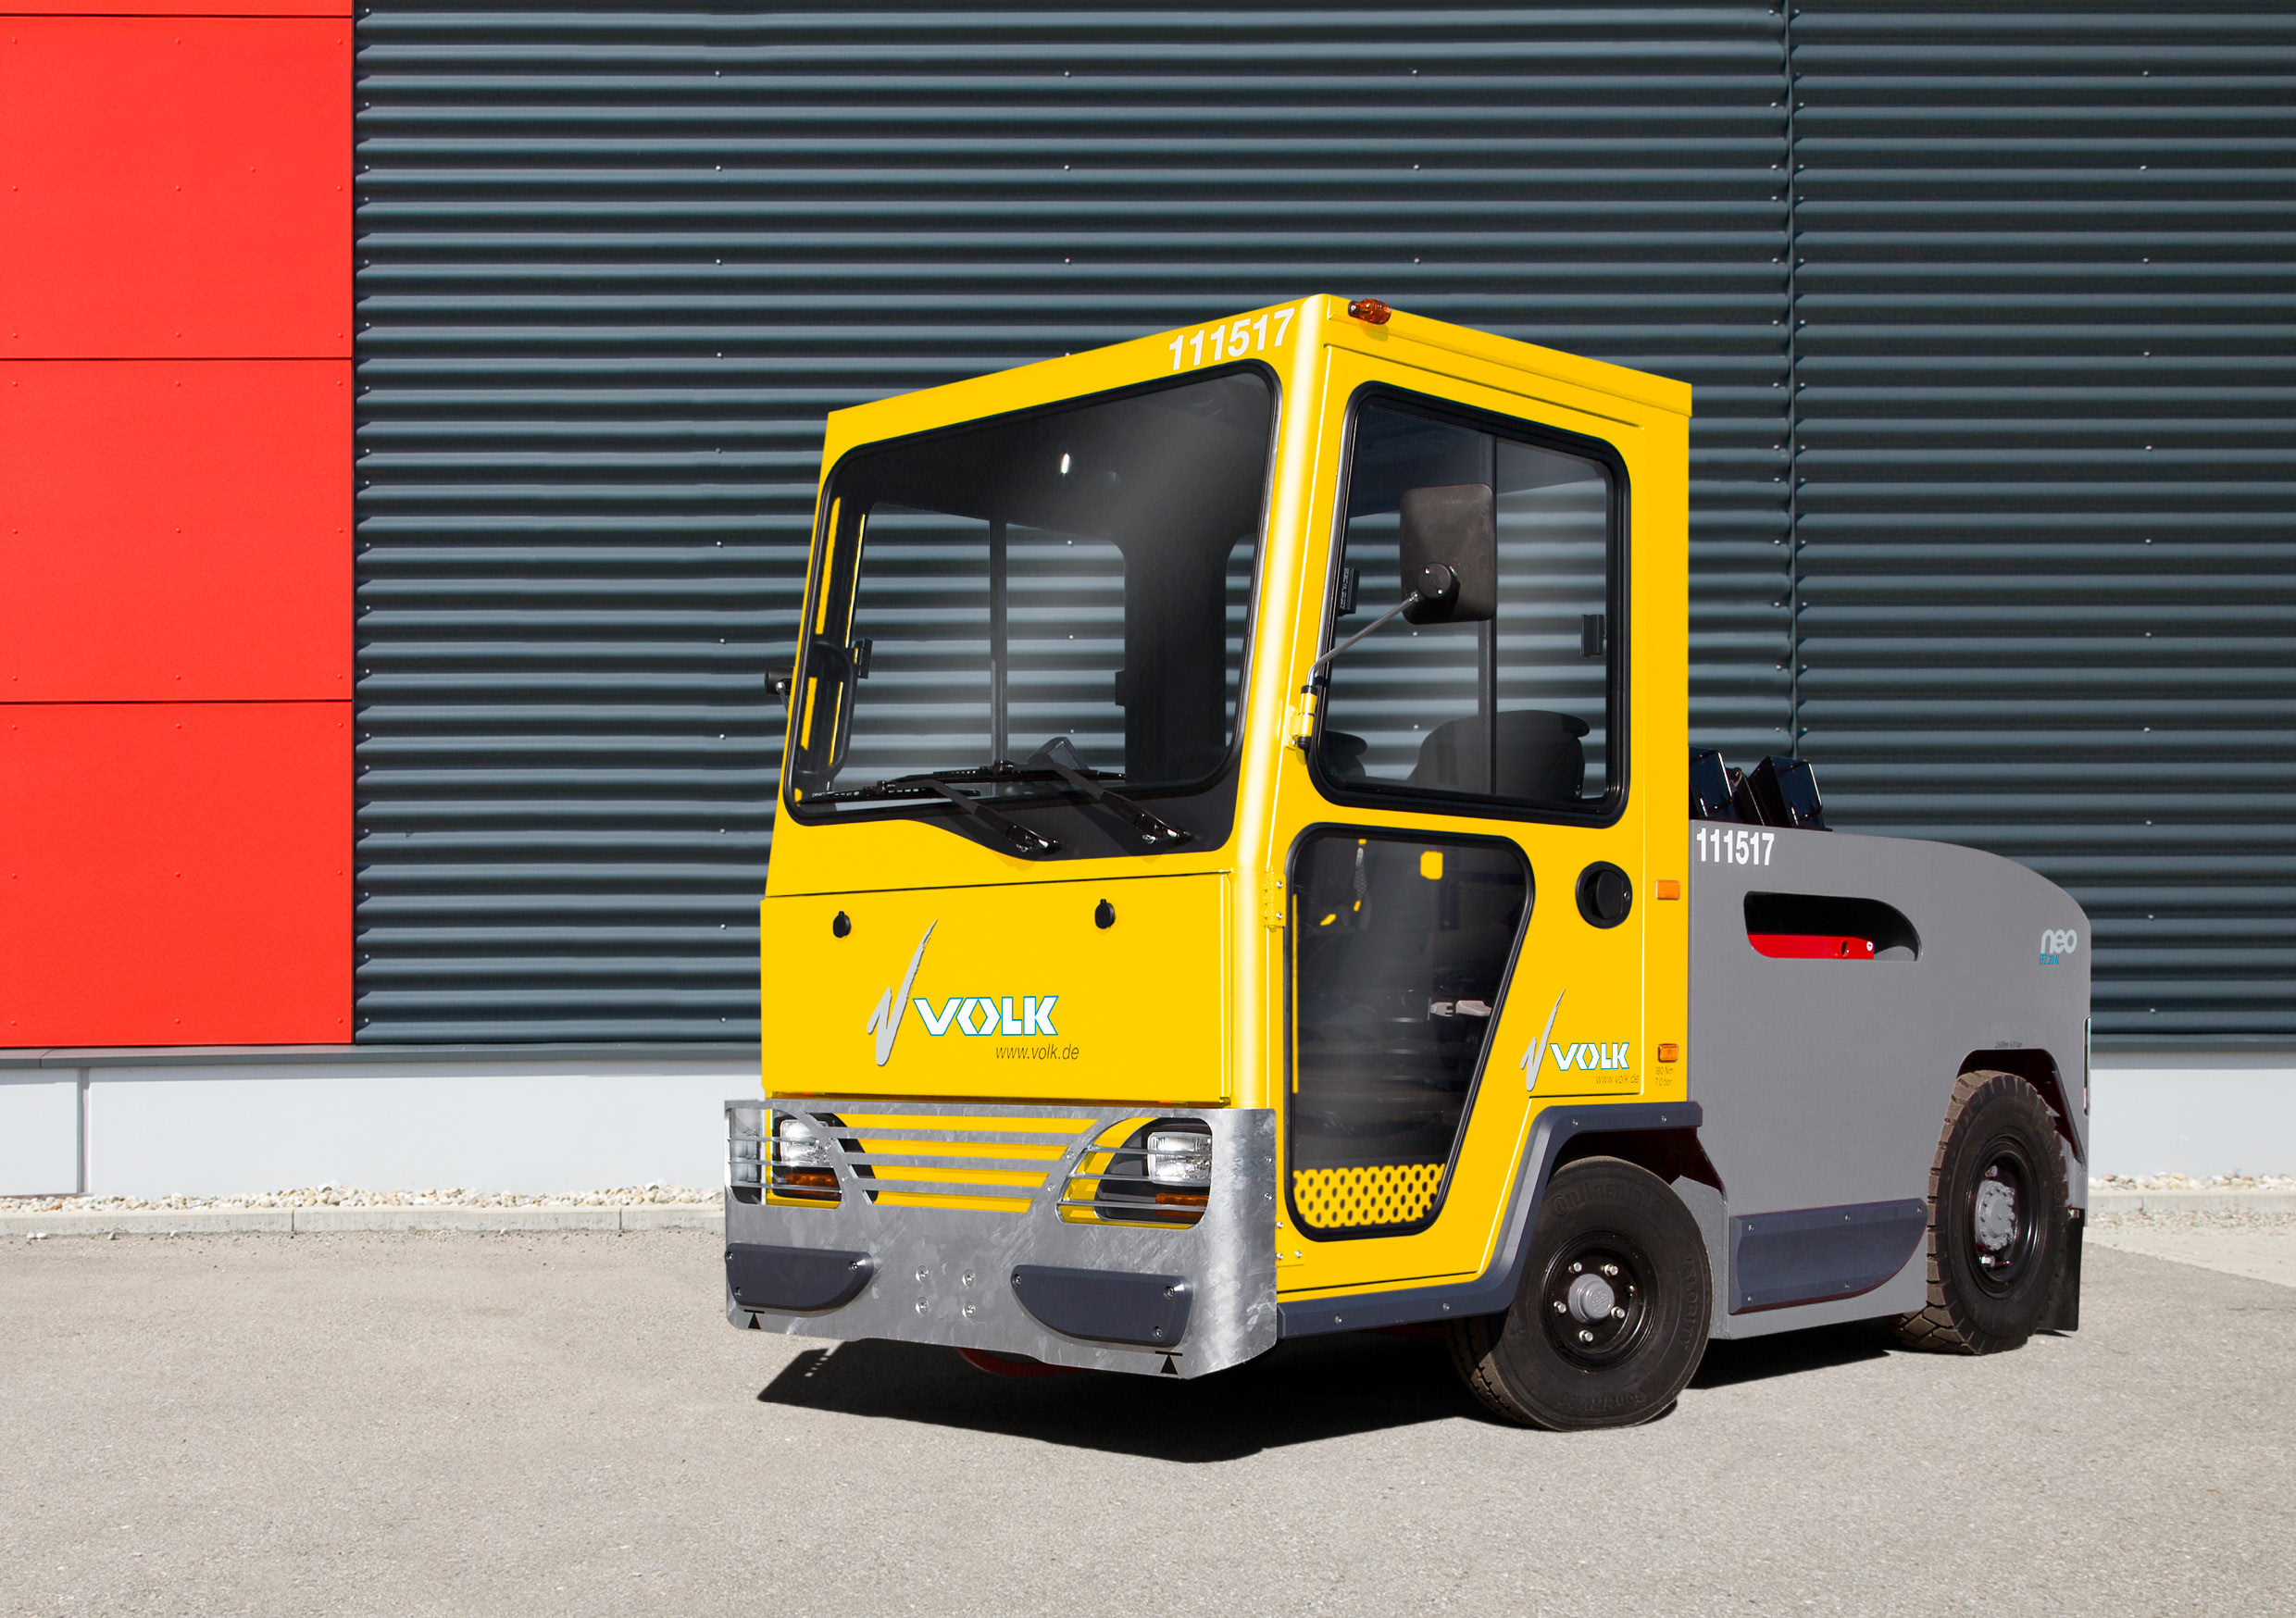 VOLK Electric tow tractor EFZ 20 N neo